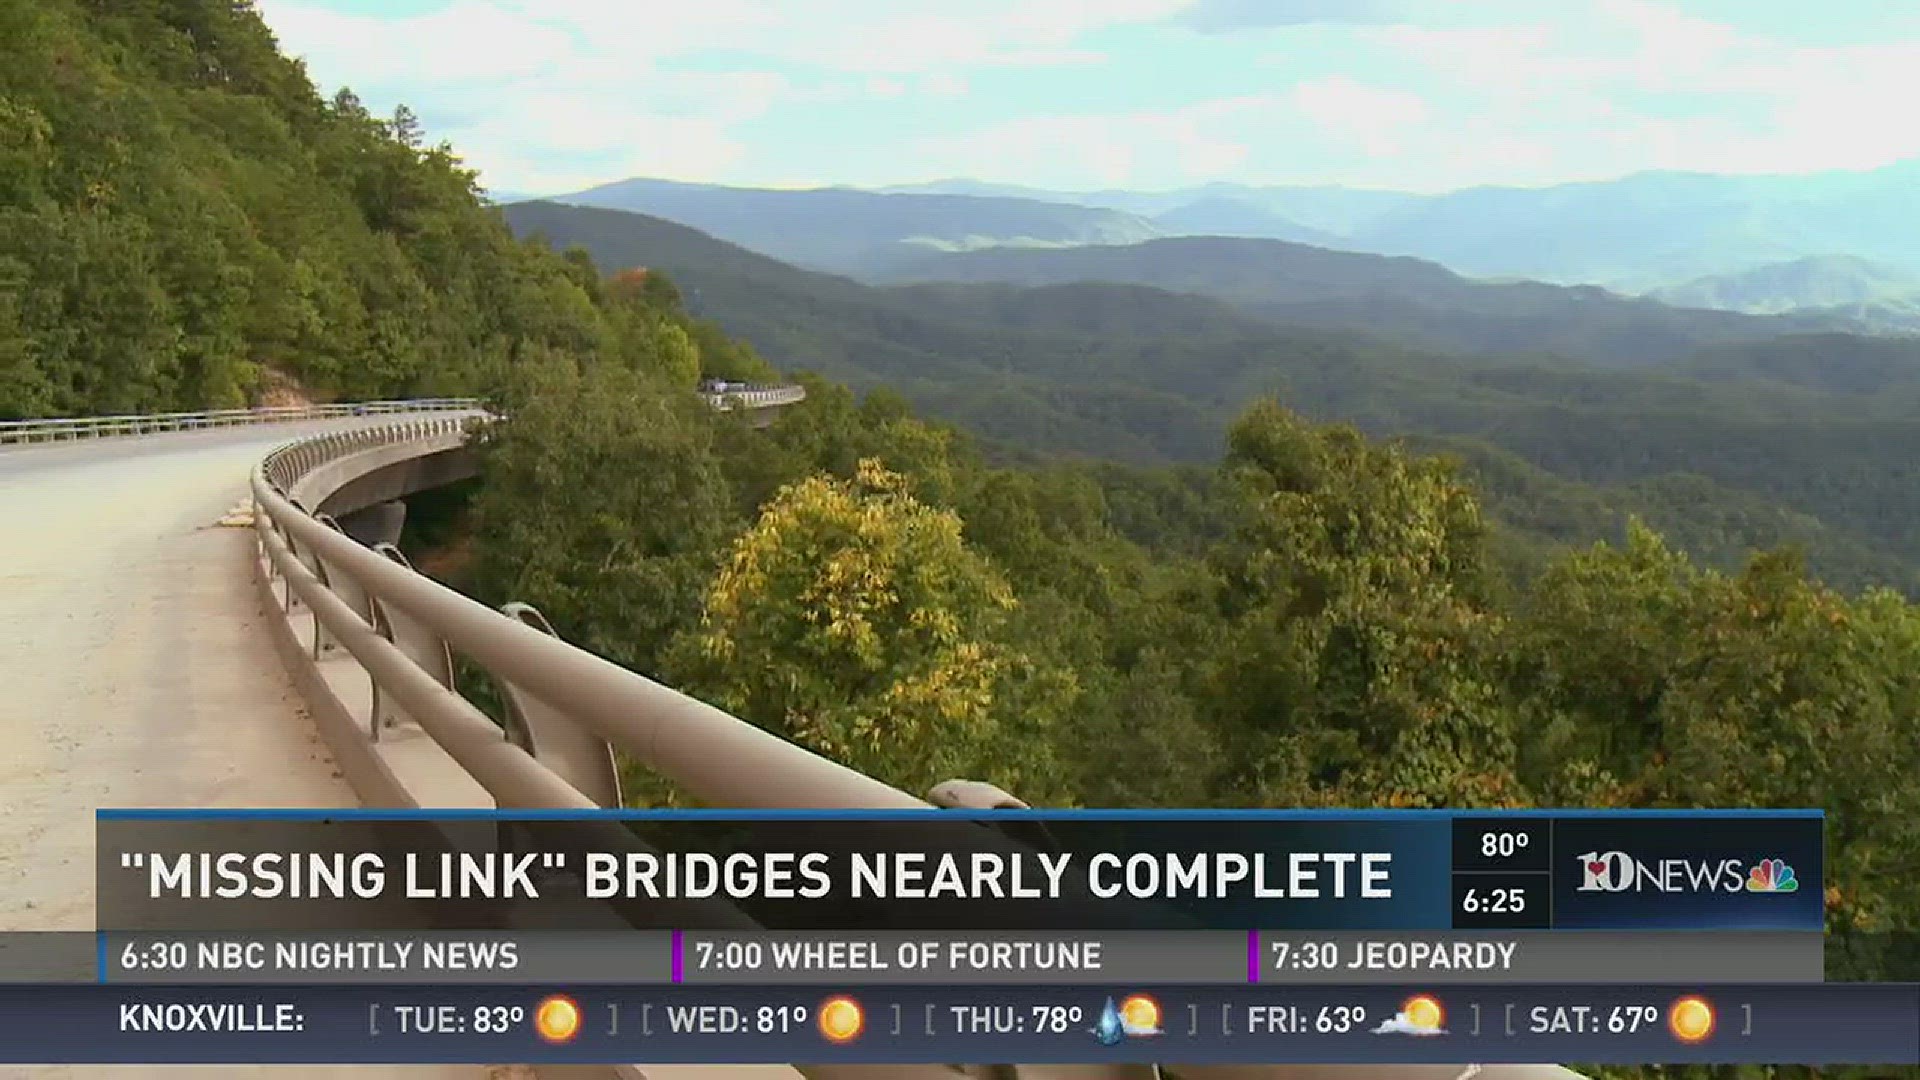 Oct. 31, 2016: A section of the Foothills Parkway known as the "Missing Link" is finally close to being complete.